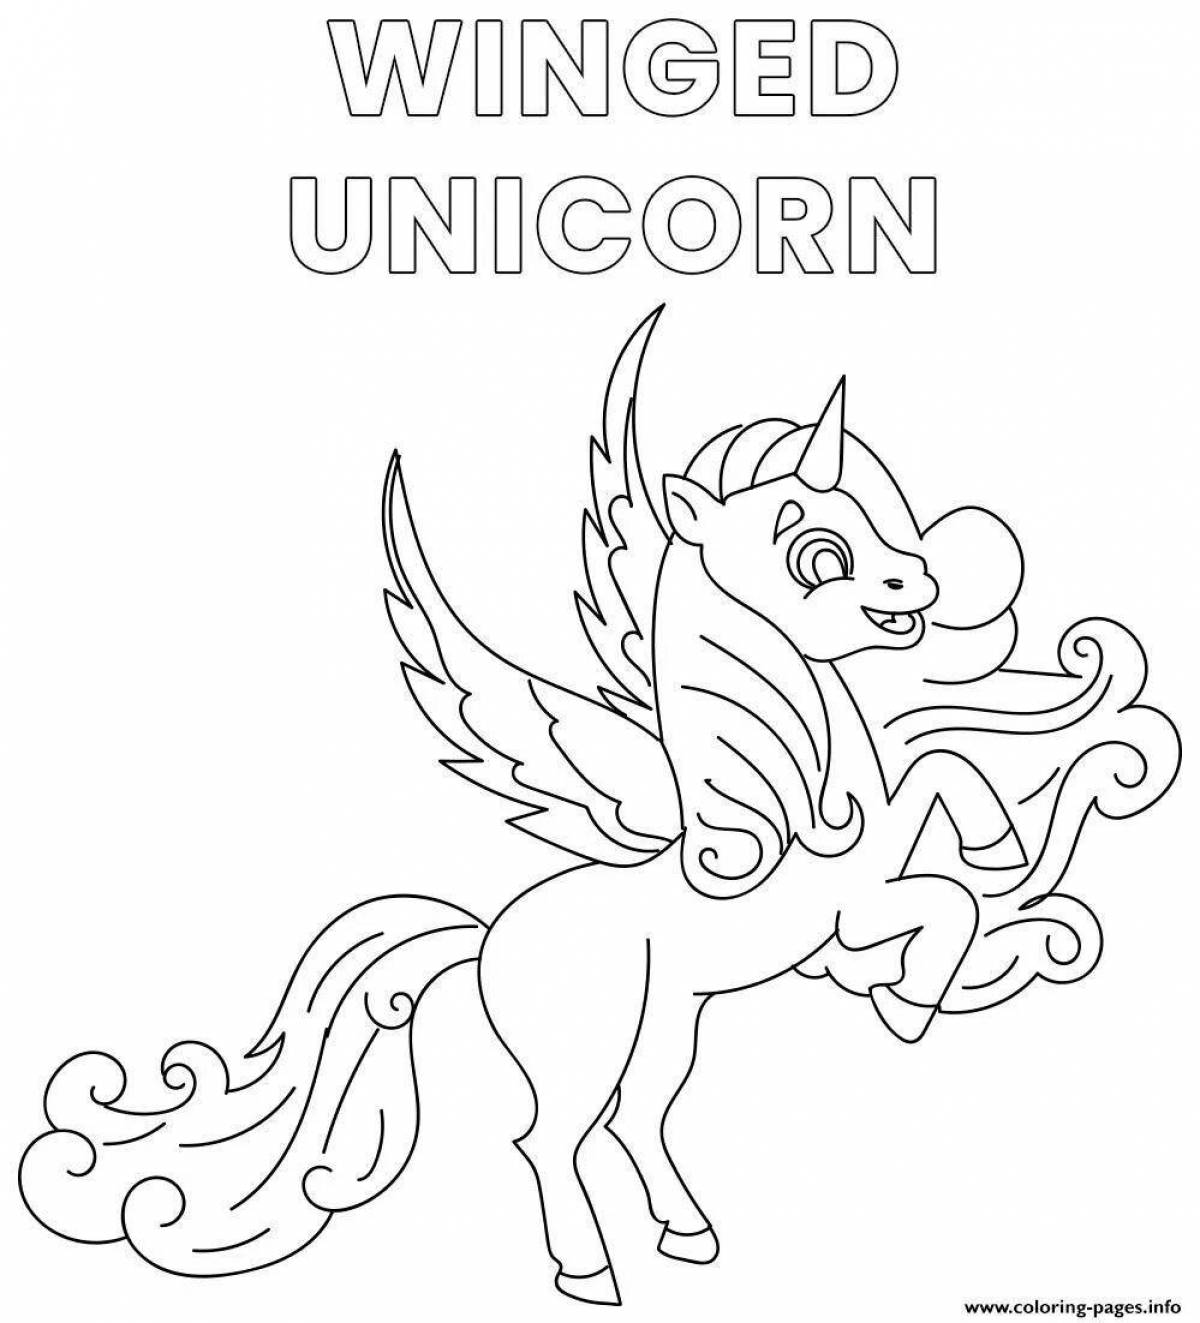 Adorable flying unicorns coloring page